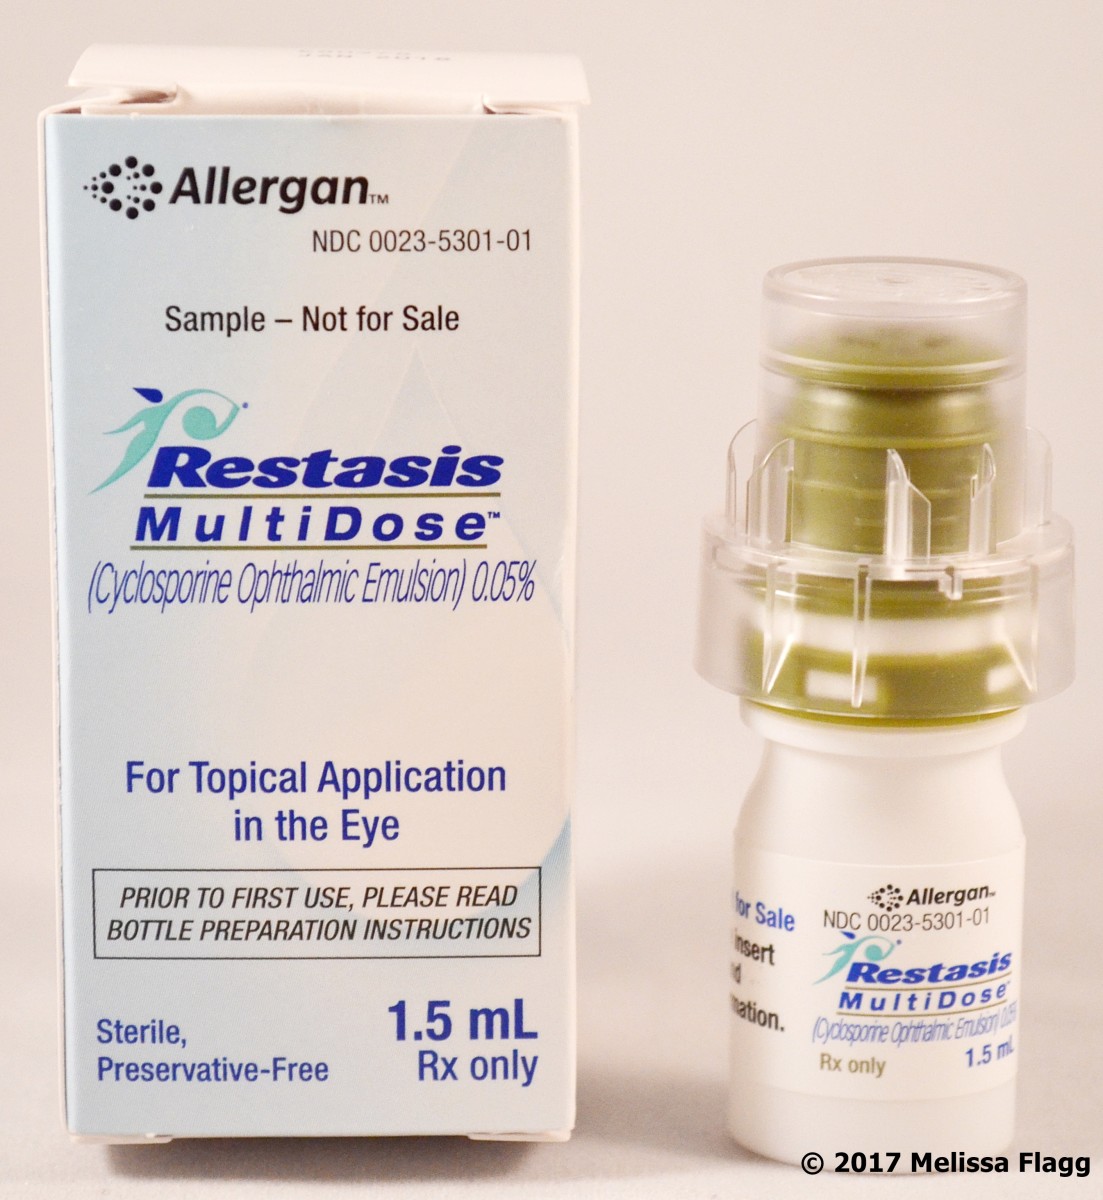 Restasis now comes in a preservative free multidose eye drop bottle instead of just the single dose vials above.